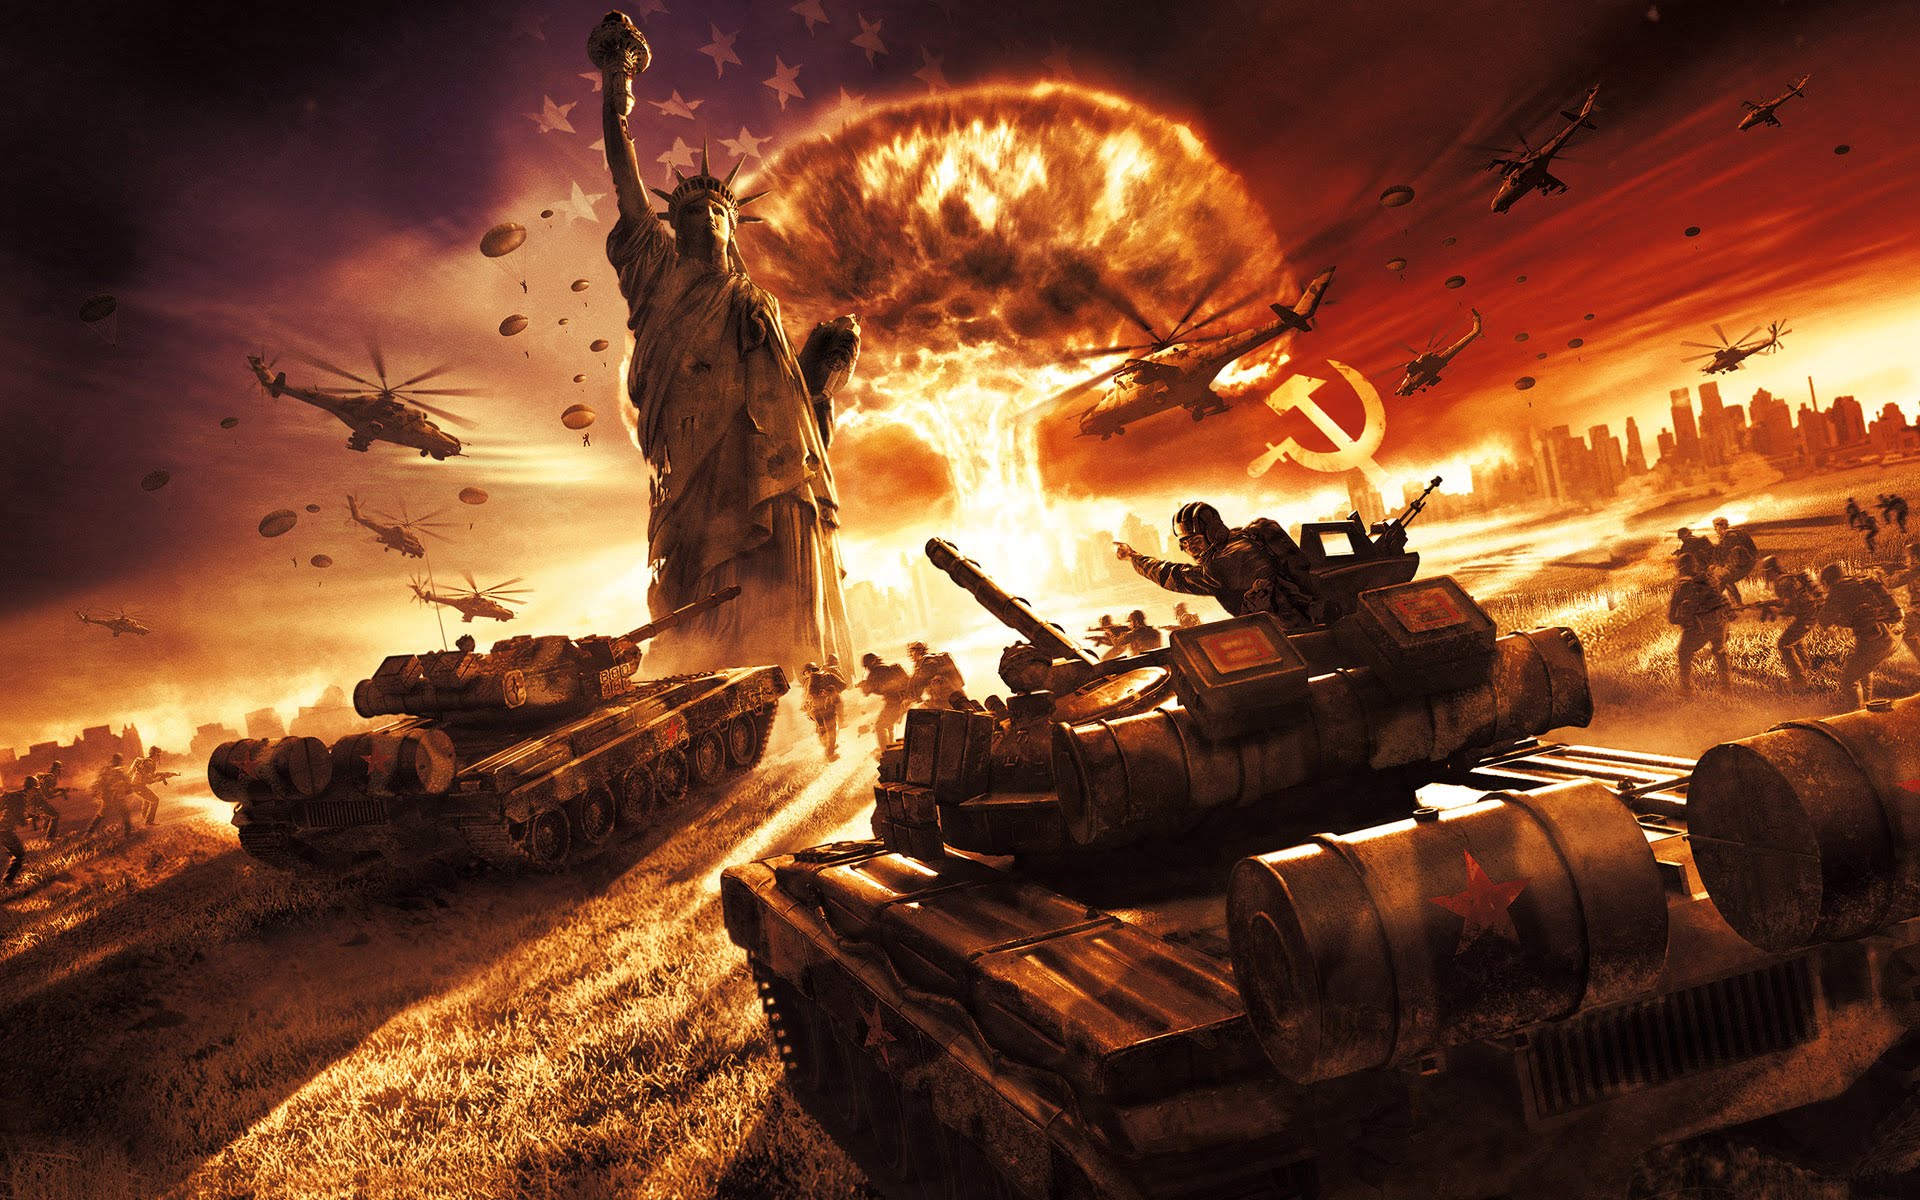 Next Future World War 3 Will Change the World Entirely – Full Documentary